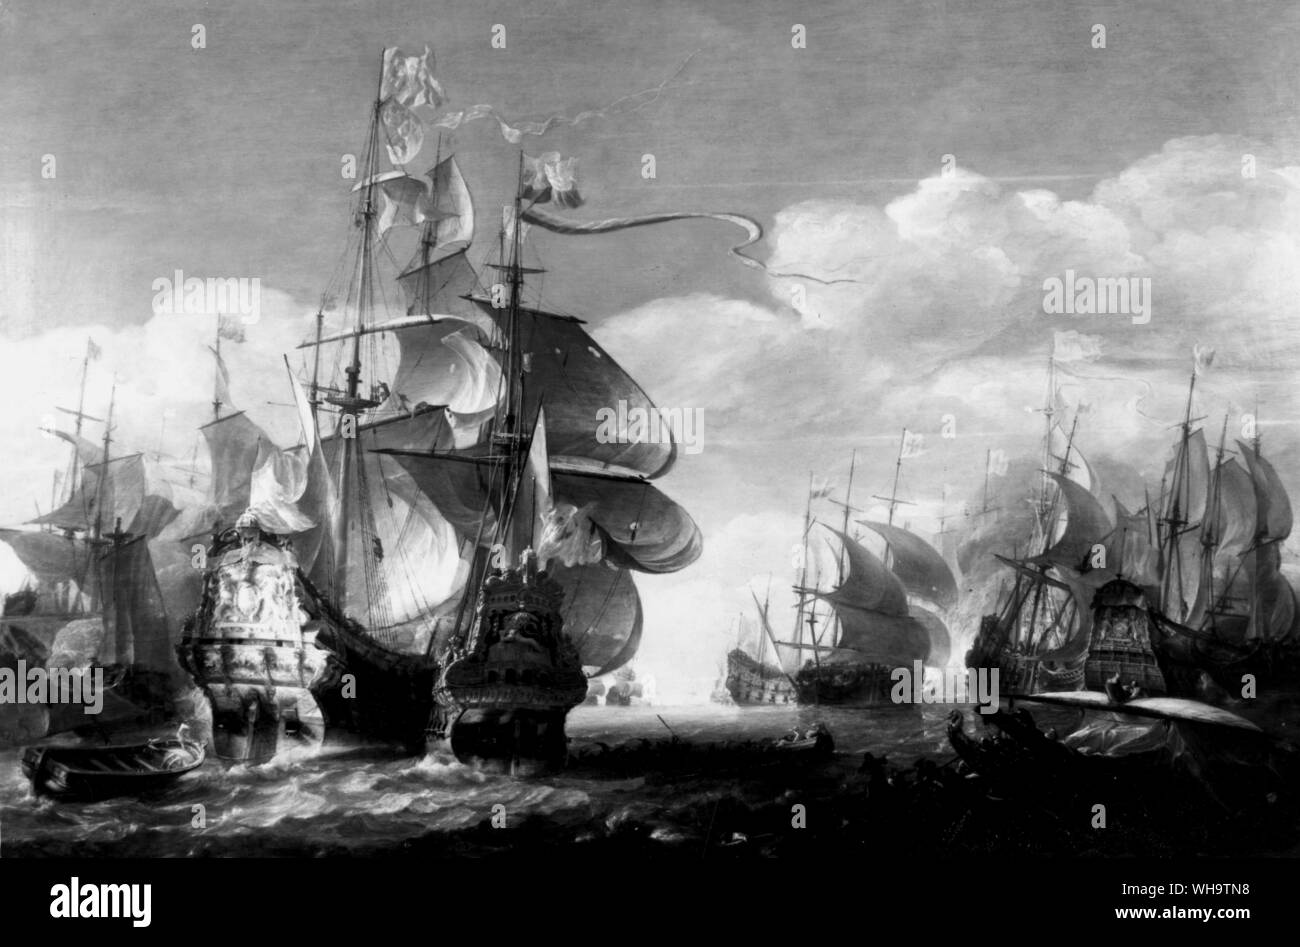 'Four days battle' 1666 by Storck. Stock Photo